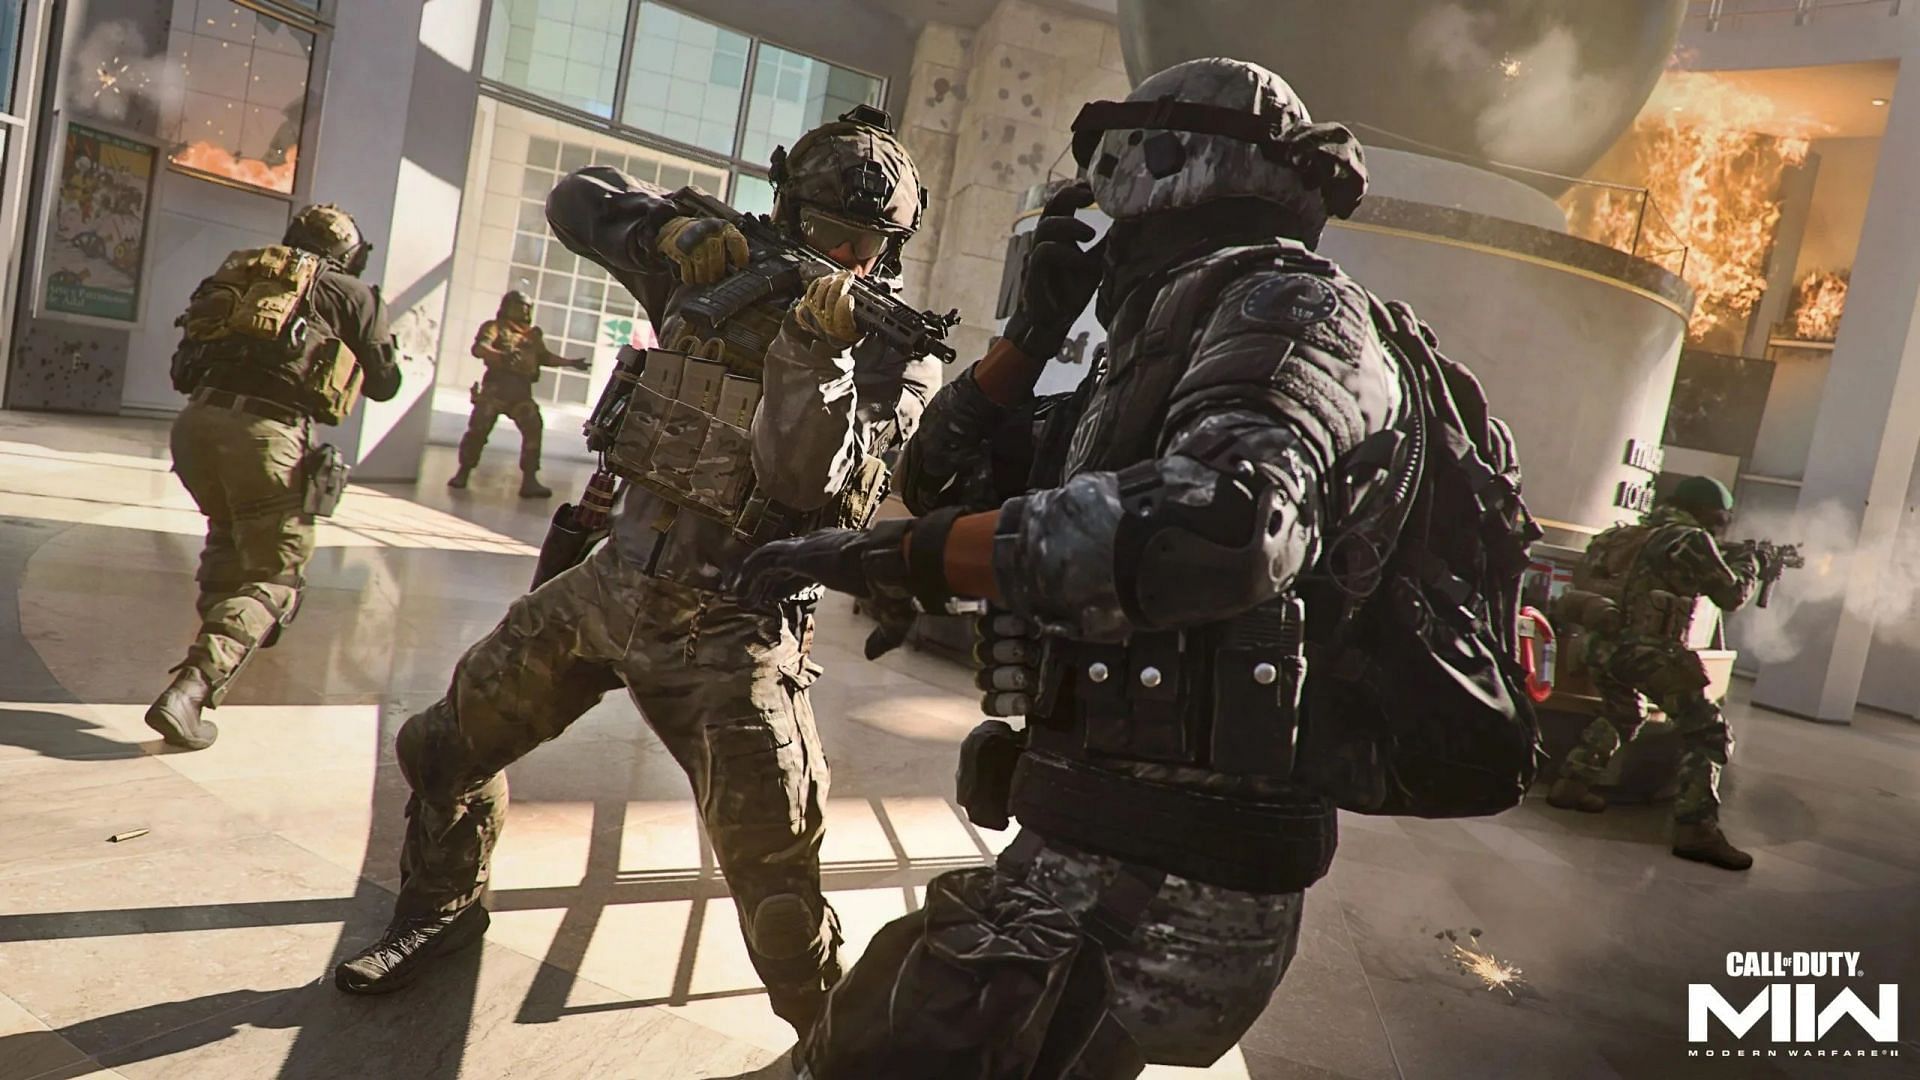 Multiplayer Modes That Call of Duty: Modern Warfare 2 Needs on Day One